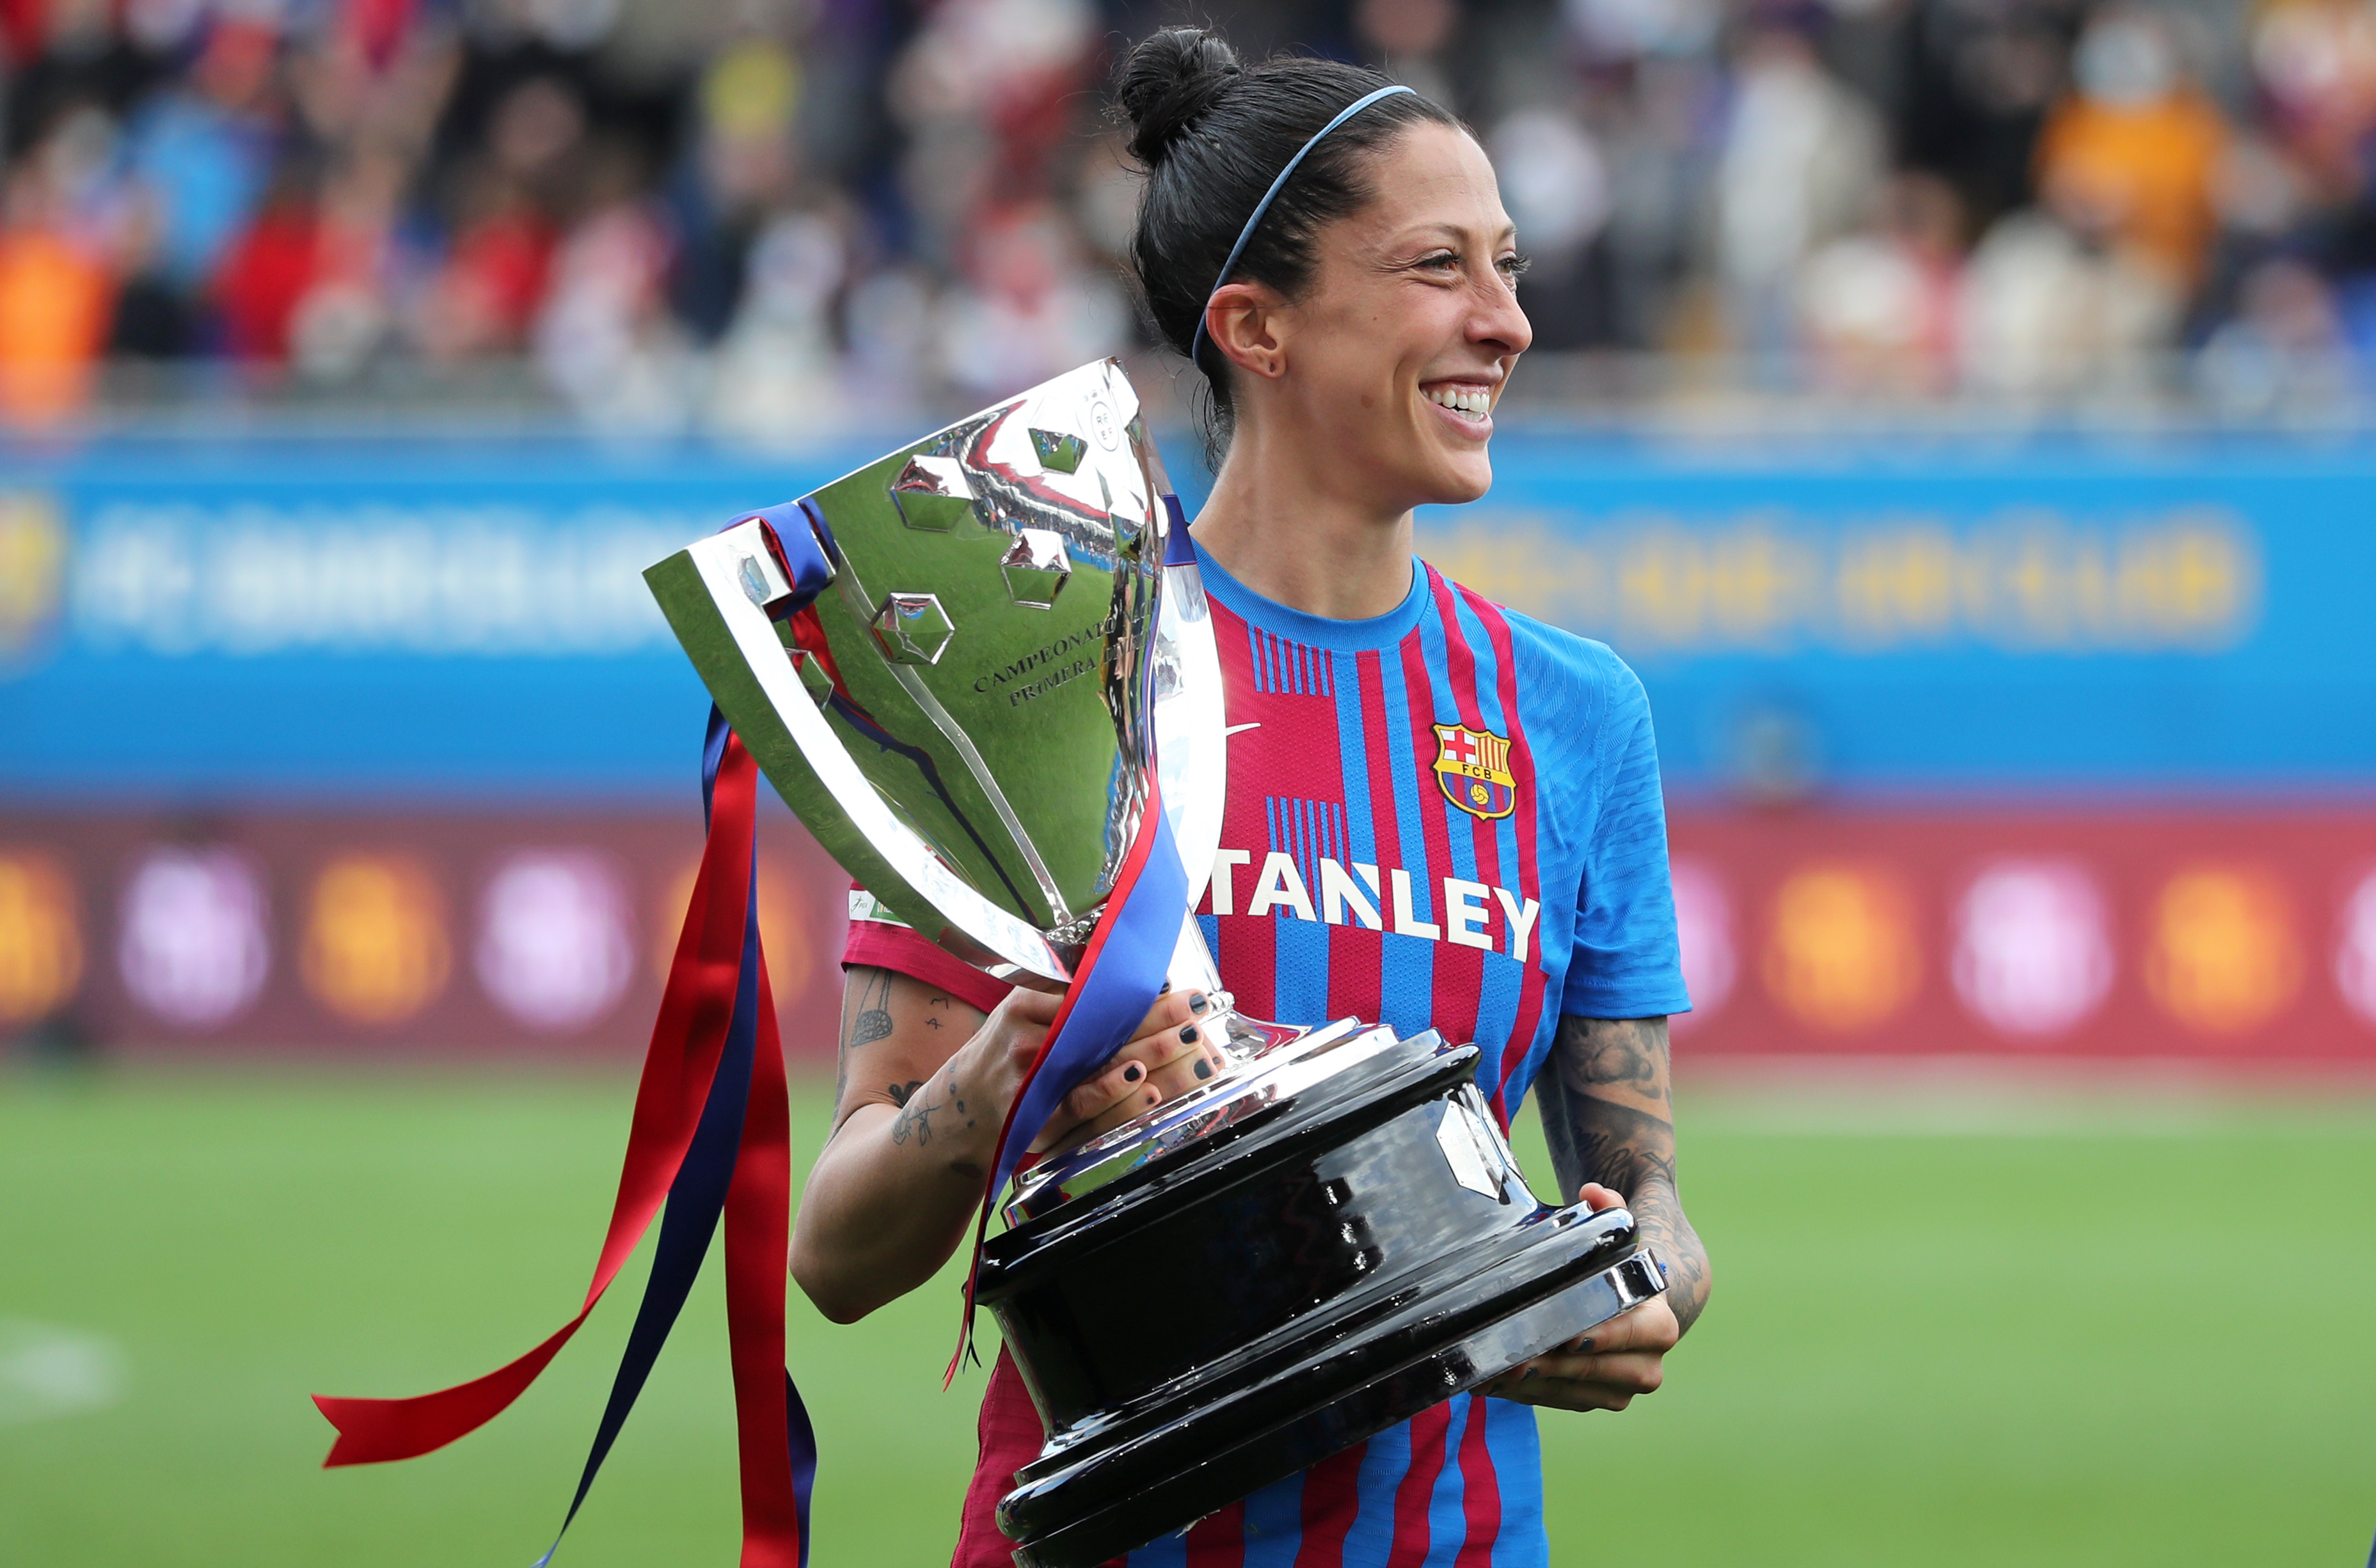 Jennifer Hermoso during the celebration for the Iberdrola League title achieved after defeating Real Madrid 5-0 at the Johan Cruyff Stadium, in Barcelona, on 13th March 2022.